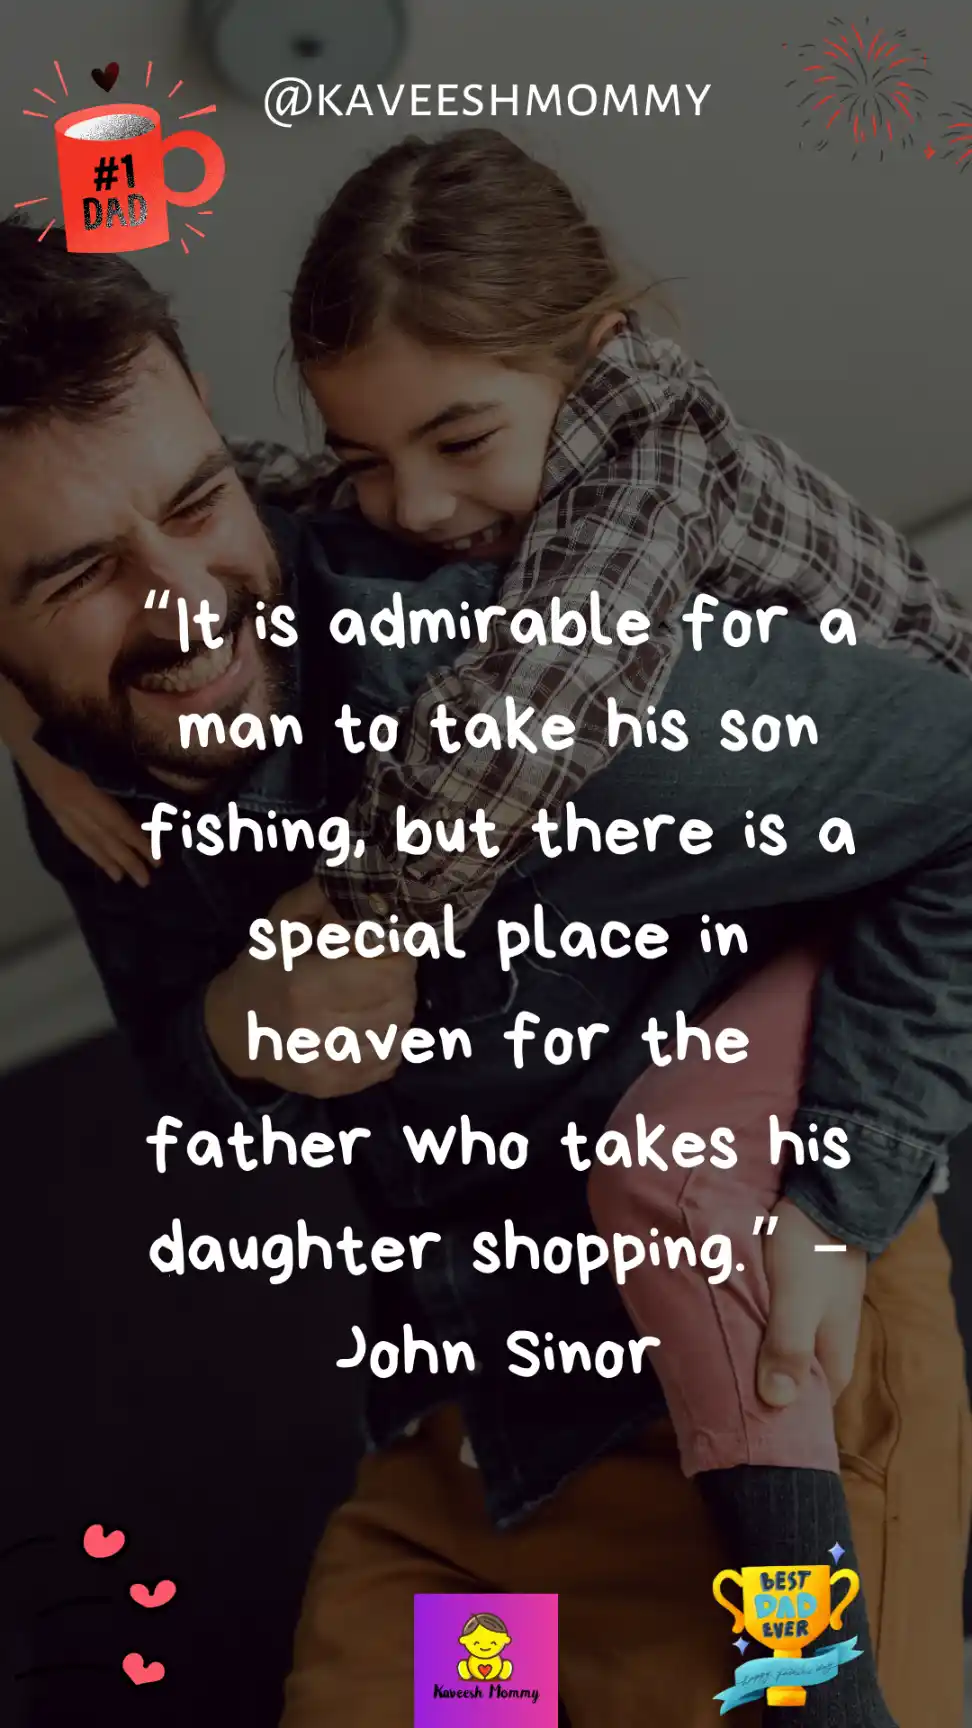 happy fathers day dad from daughter-“It is admirable for a man to take his son fishing, but there is a special place in heaven for the father who takes his daughter shopping.” – John Sinor